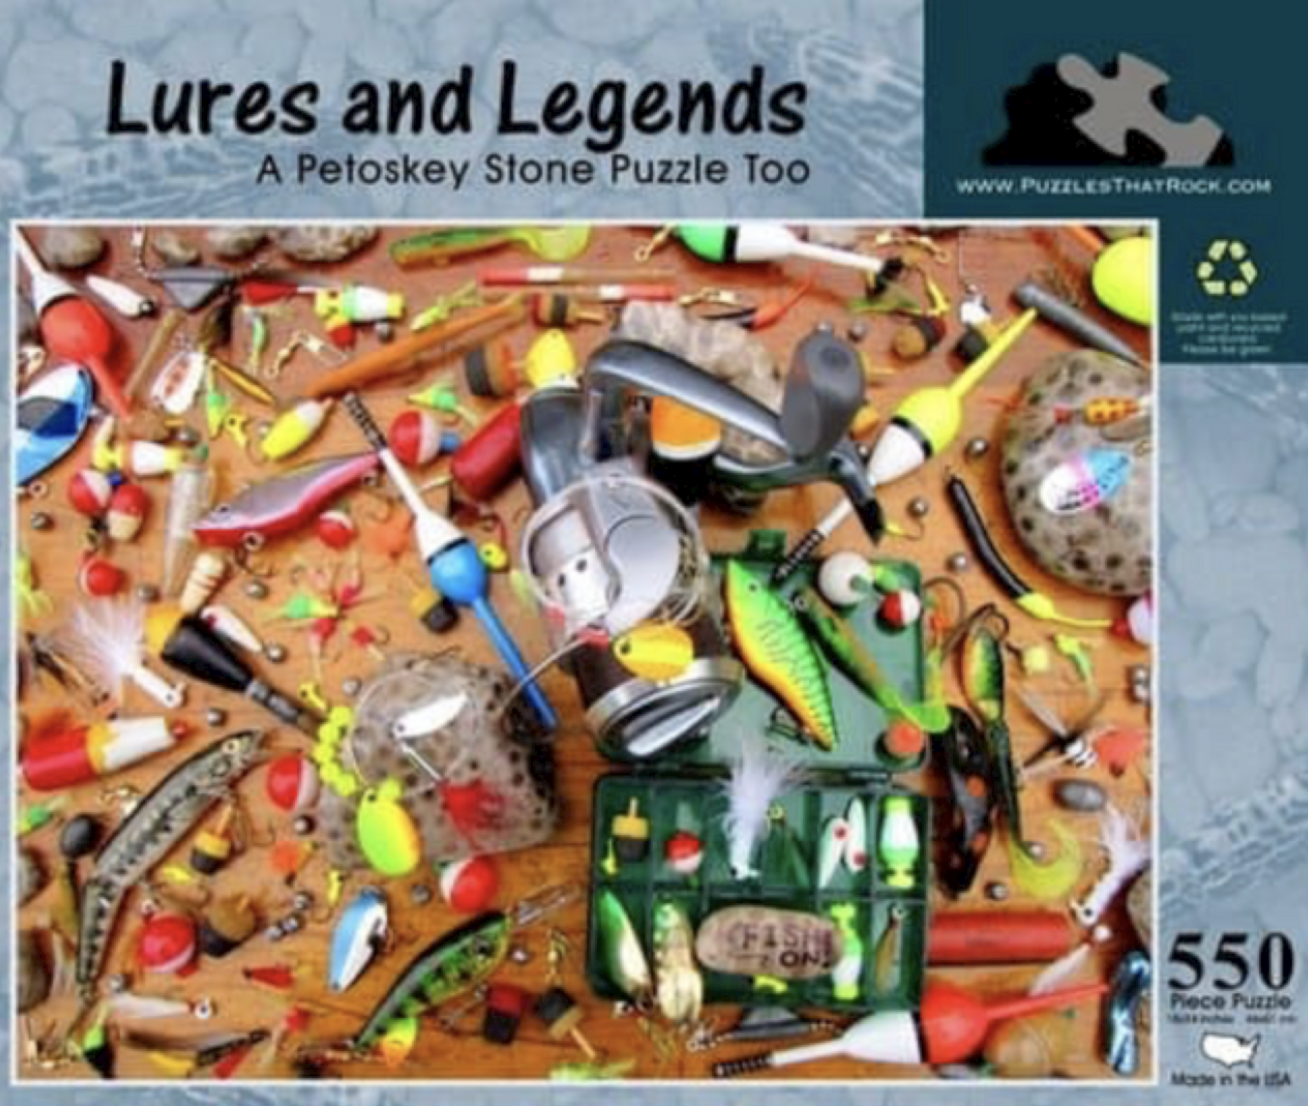 LURES AND LEGENDS JIGSAW PUZZLE 550 PCS